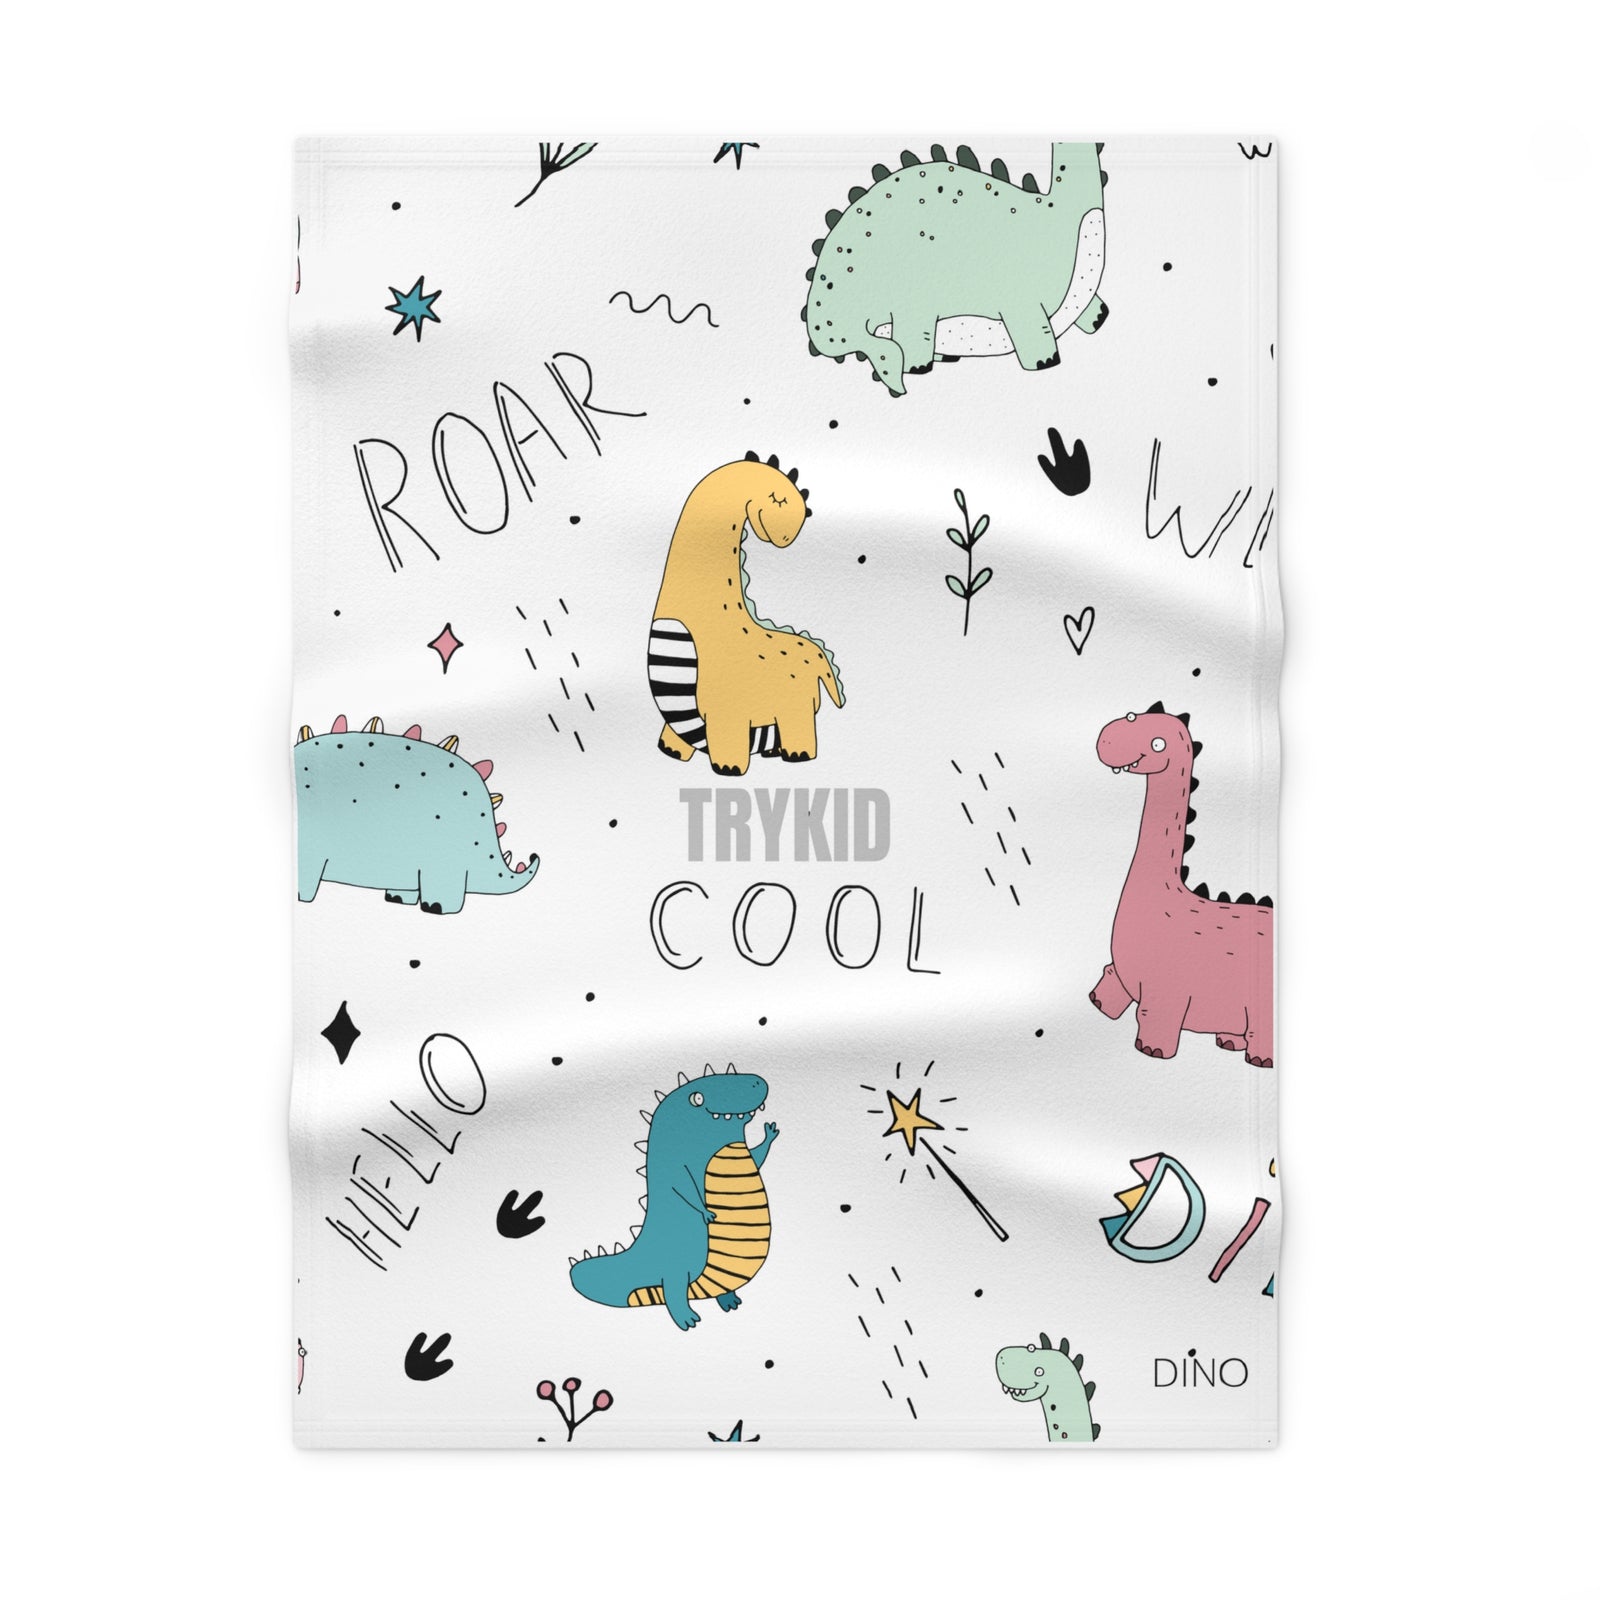 Dino Delight: Soft Fleece Baby Blanket with Playful Dinosaur Pattern Print and TryKid Logo for Cozy Cuddles